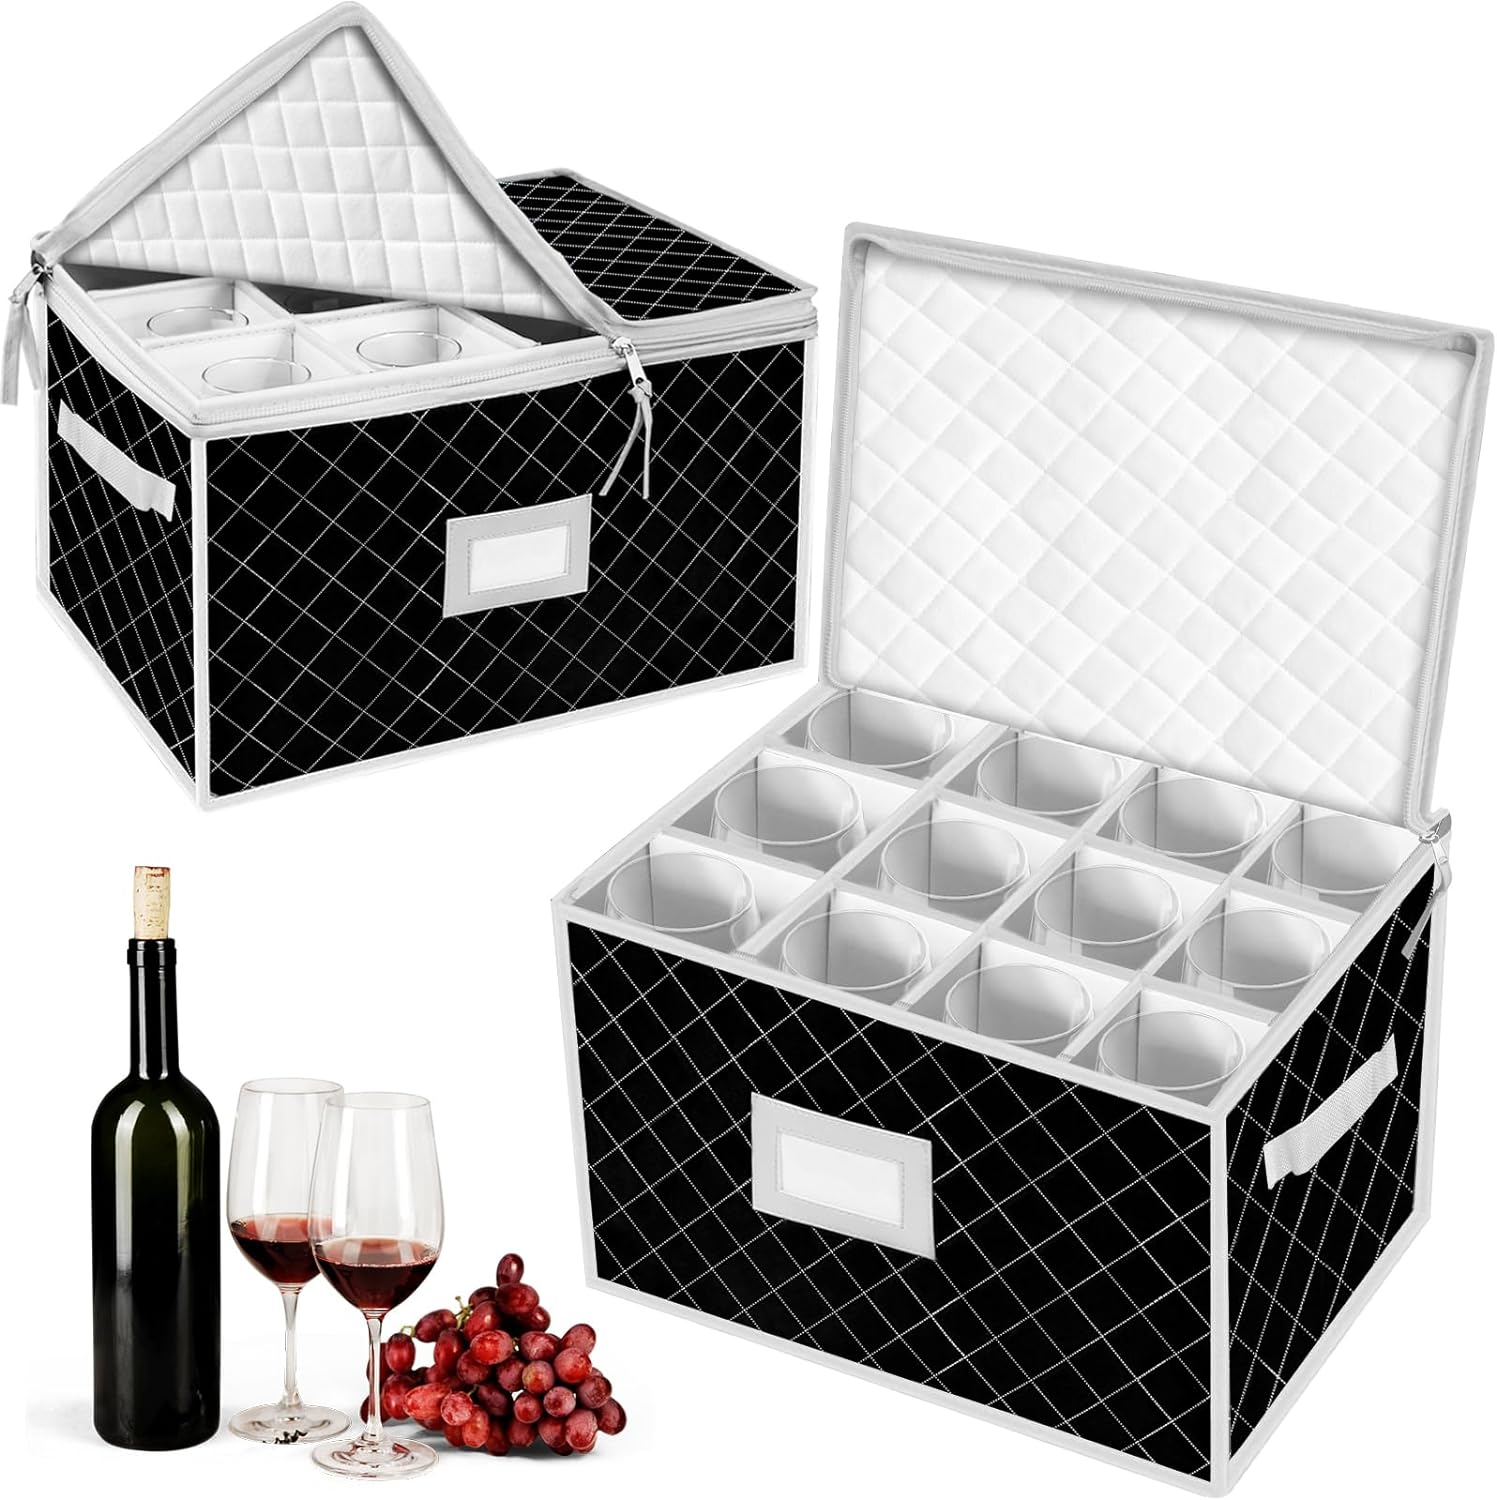 VERONLY China Storage Containers - Stemware Storage Cases for 12 Wine Champagne Glasses - 2 Pack Crystal Glassware Protector Packing Boxes with Dividers and 2 Handles for Moving (Black)